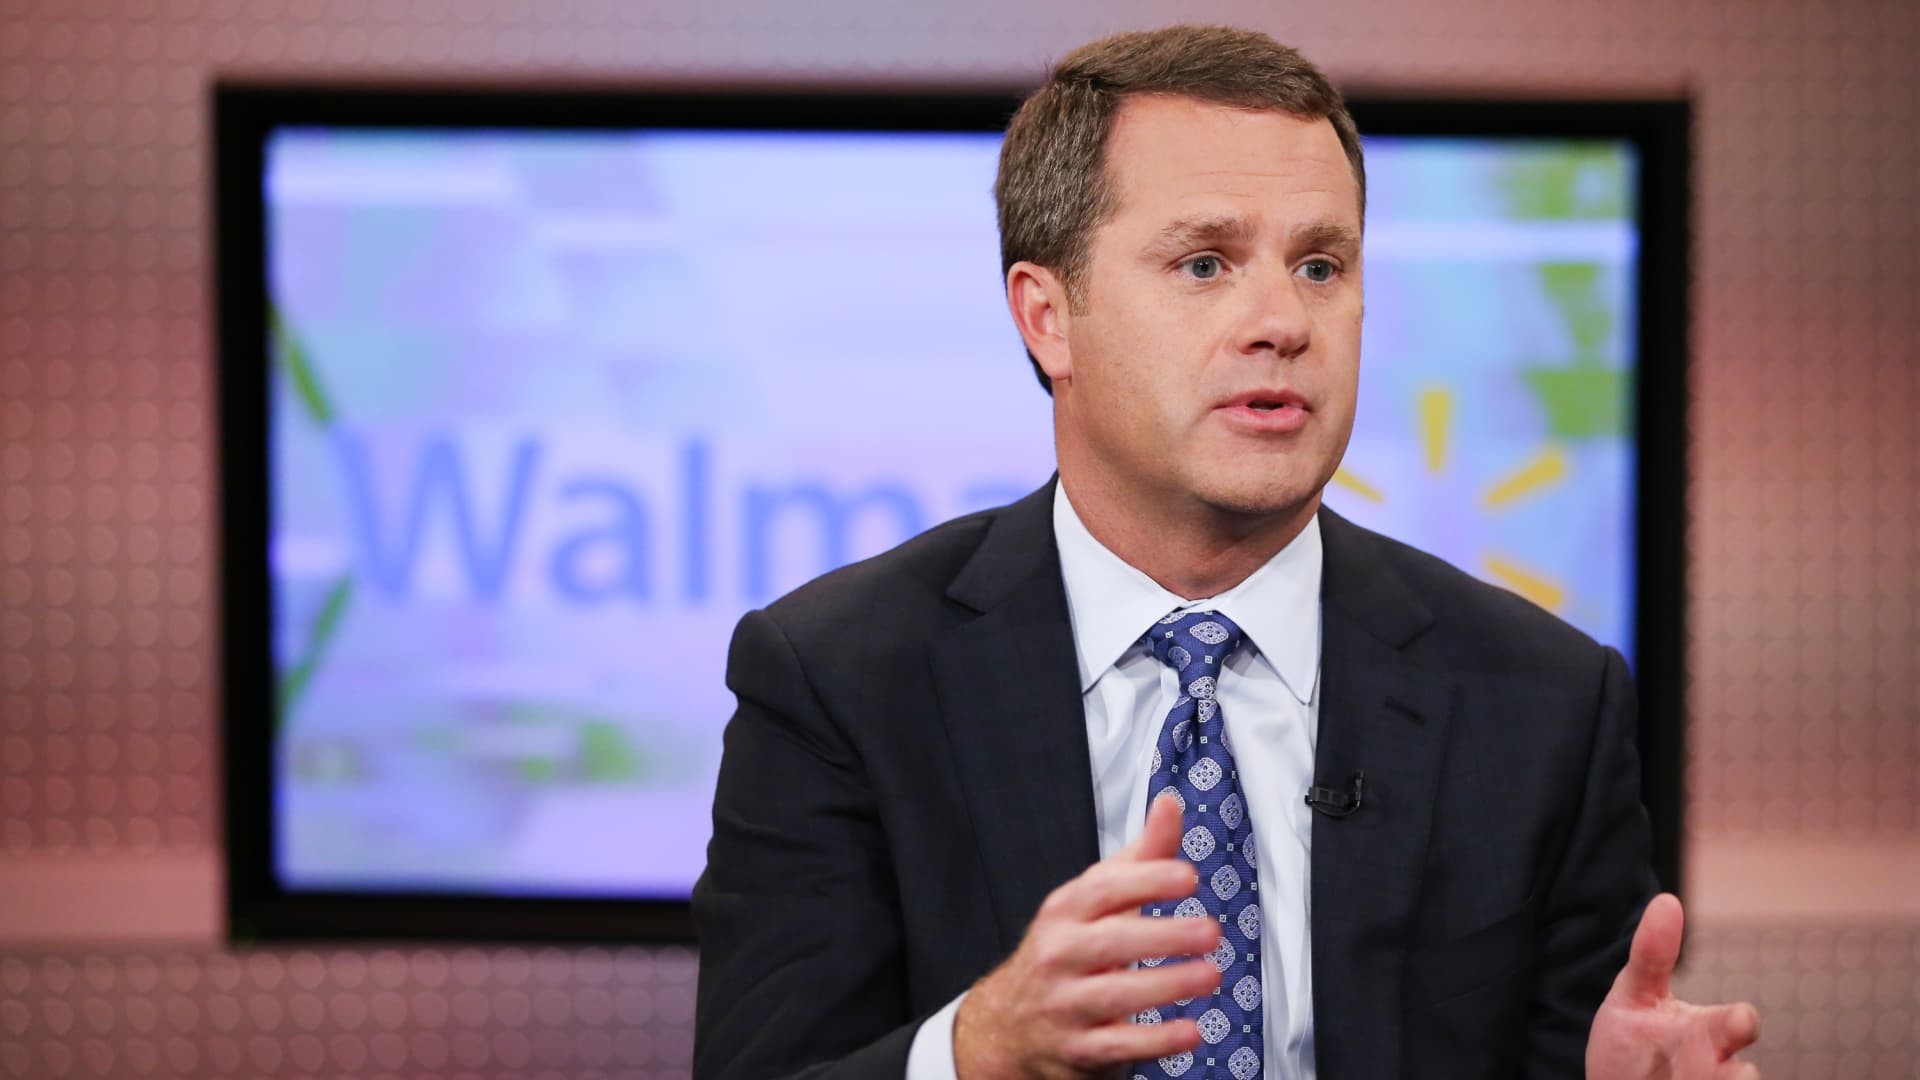 Walmart CEO Doug McMillon vows to keep private labels priced low to fight inflation